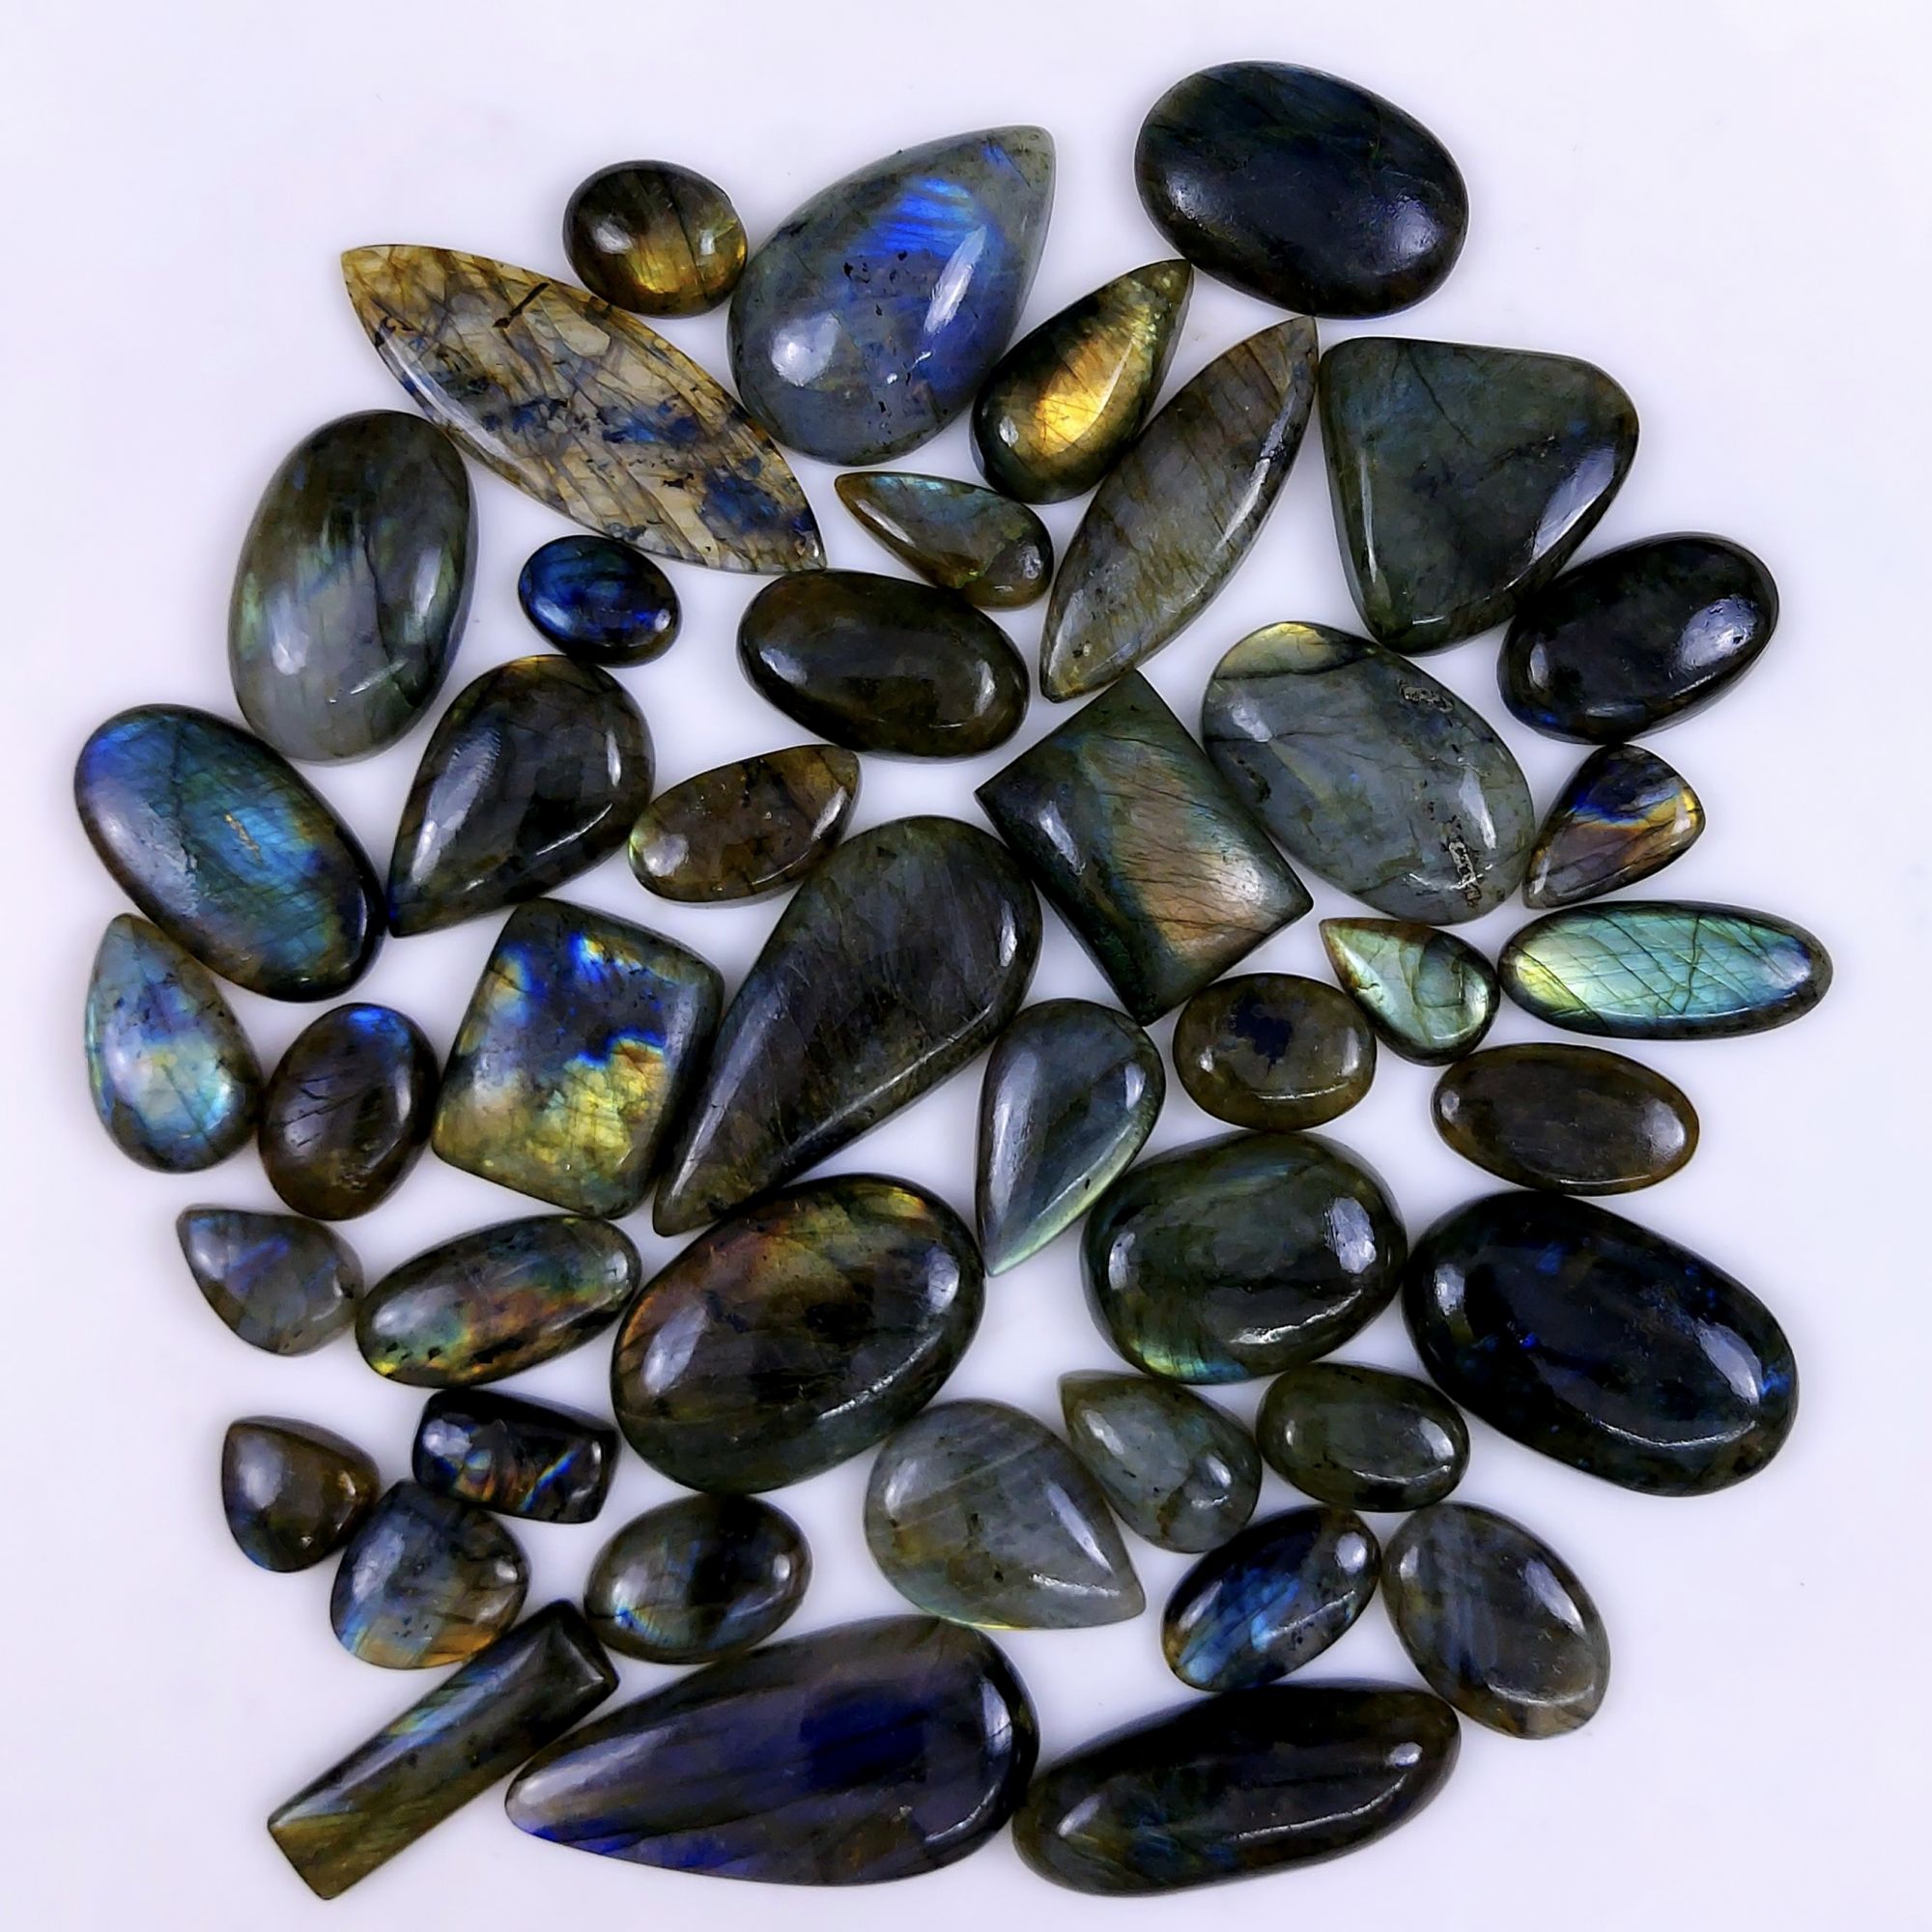 44pc 1699Cts Labradorite Cabochon Multifire Healing Crystal For Jewelry Supplies, Labradorite Necklace Handmade Wire Wrapped Gemstone Pendant 55x26 18x14mm#6284